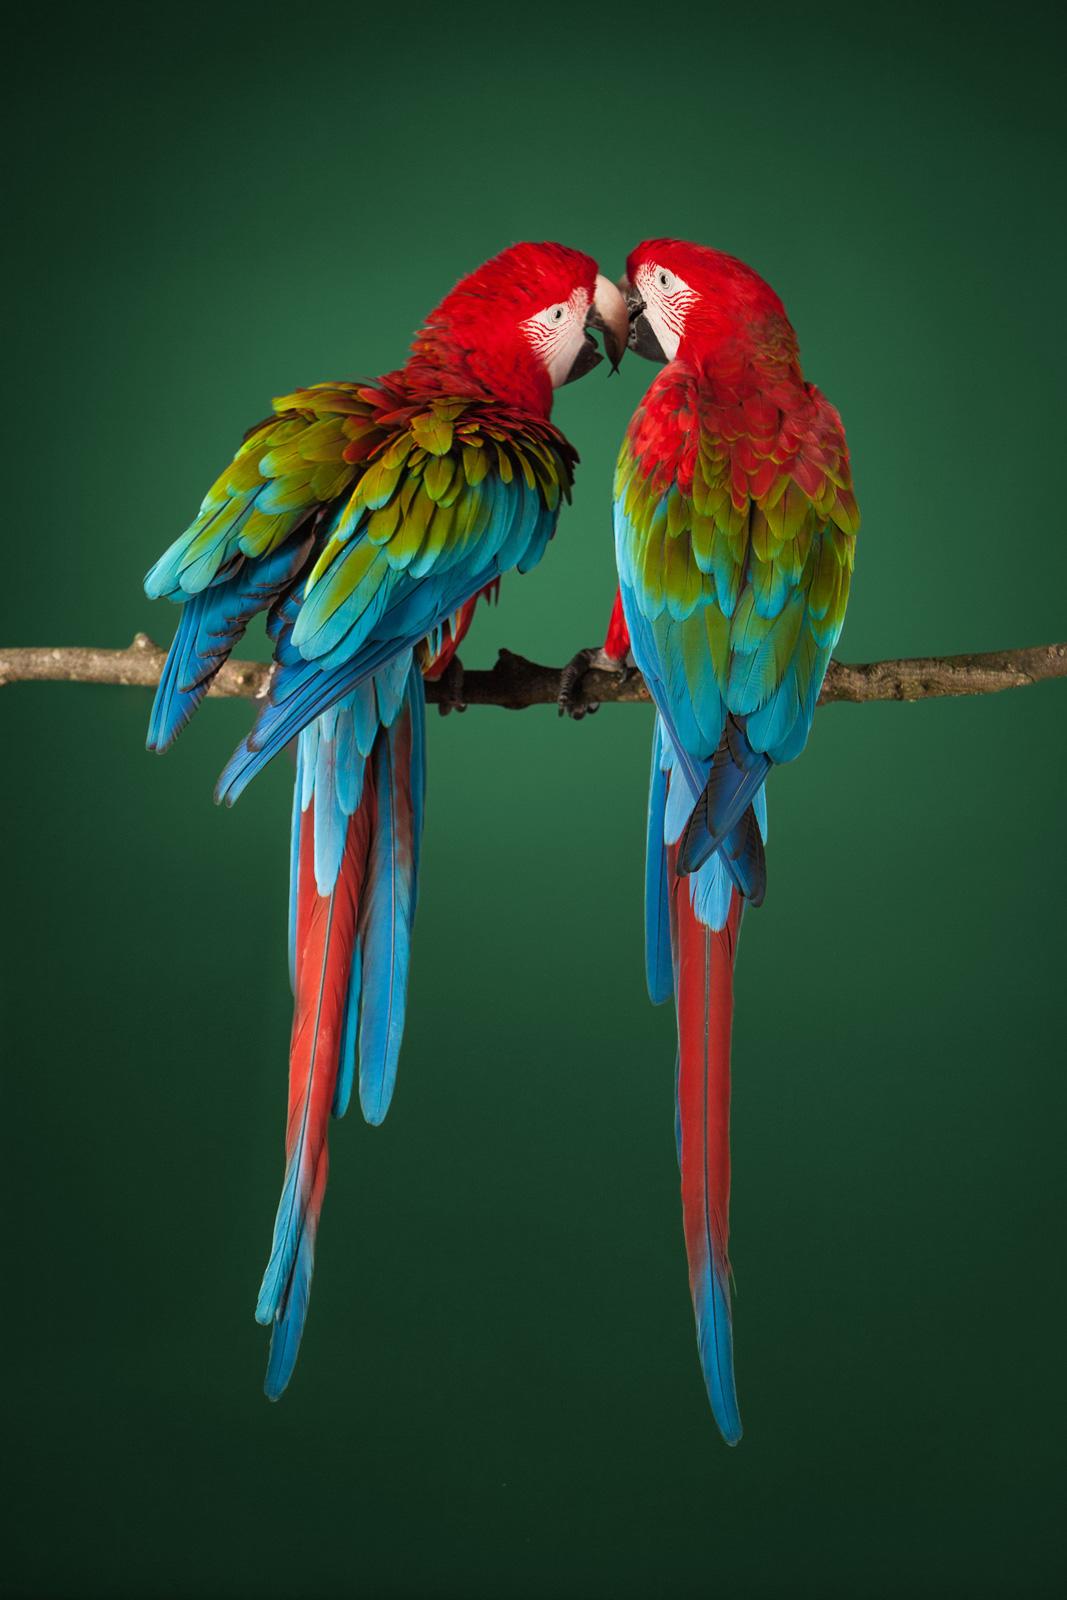 Macaw #2  -  Signed limited edition archival pigment print  -  Edition of 3
Oversize print

Green Winged Macaws are monogamous and pair for life. They become inseparable, so wherever they go they must travel together. They are highly intelligent and